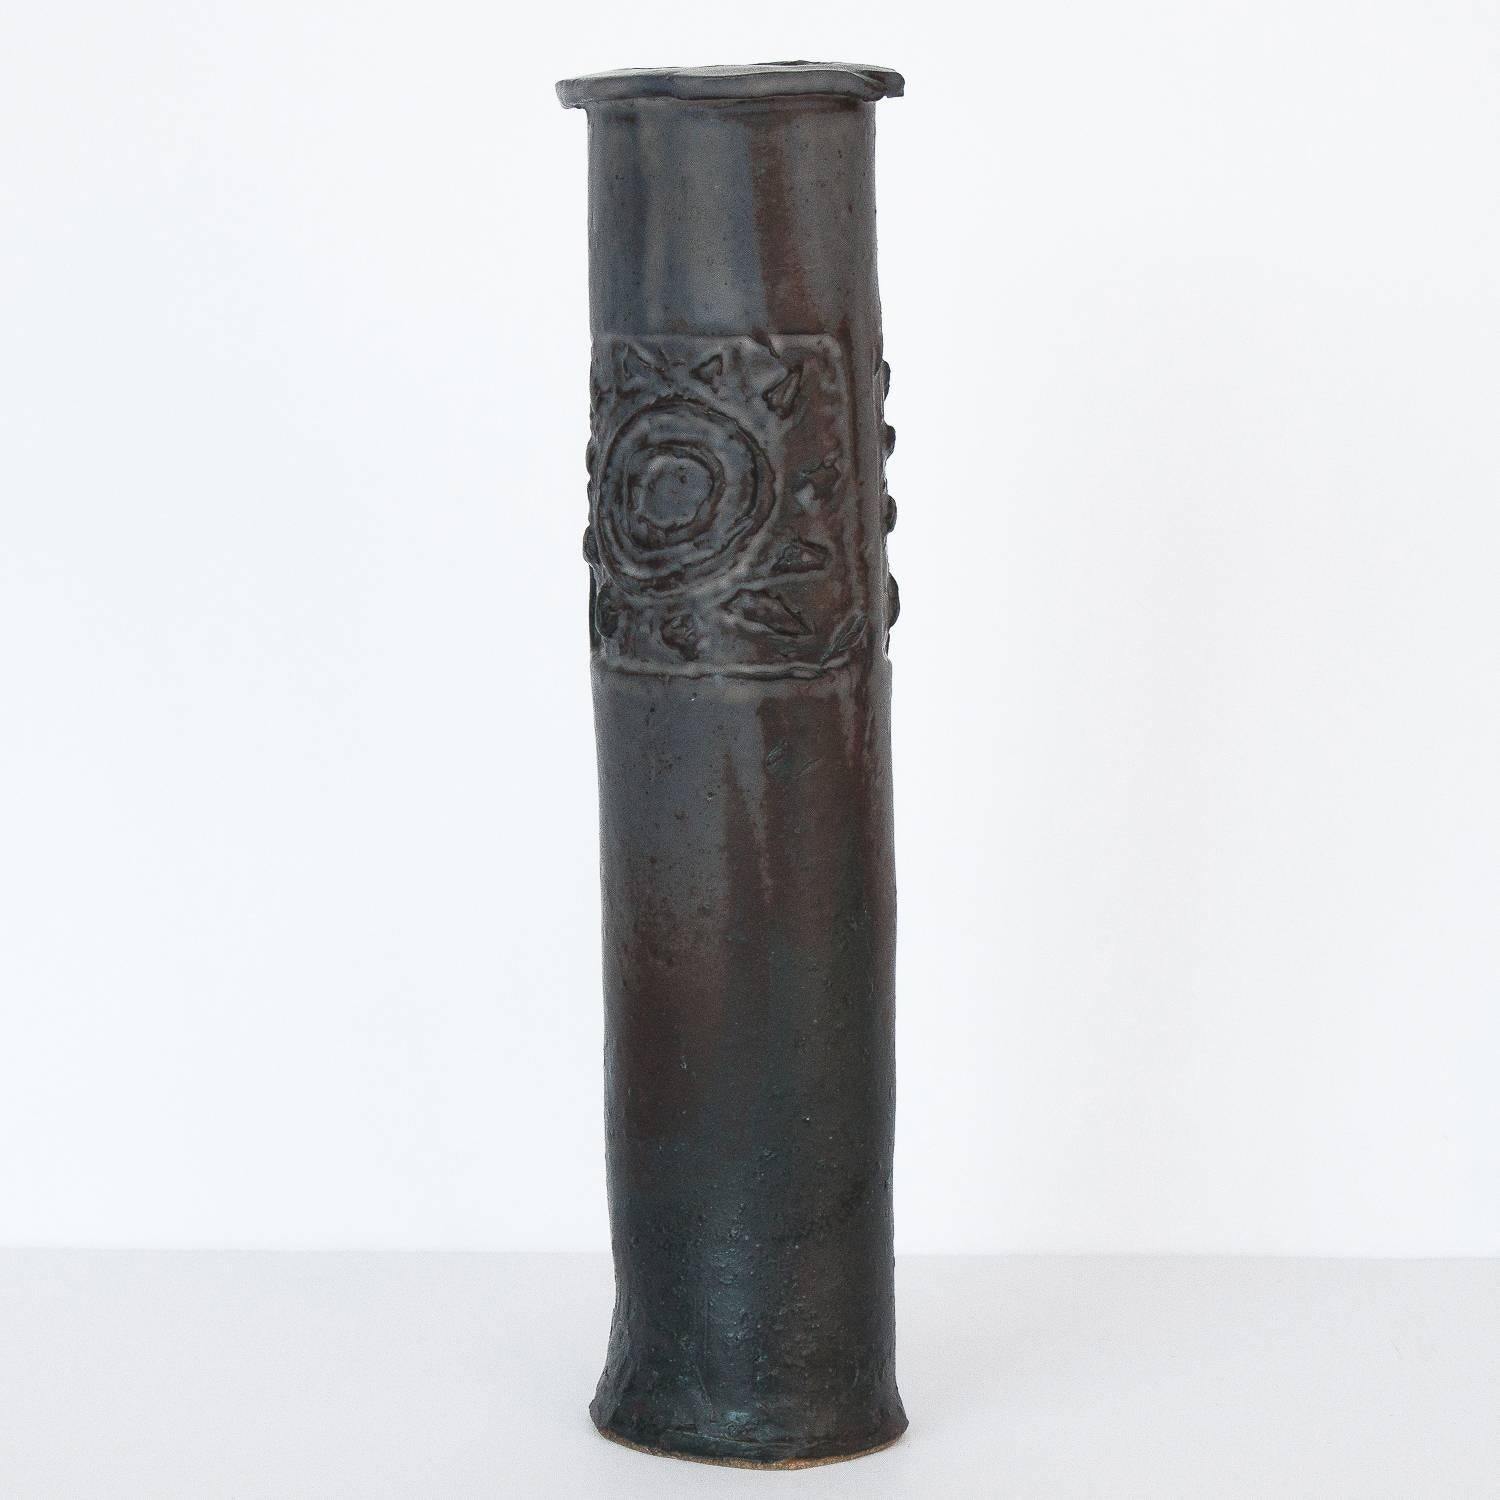 Brutalist Studio Pottery vase by Ethel "Eppie" Potts. Tall narrow slab style vase with abstract sun motif on both sides. Gray, brown and dark green glaze. Signed Kudrna, her Czechoslovakian maiden name.